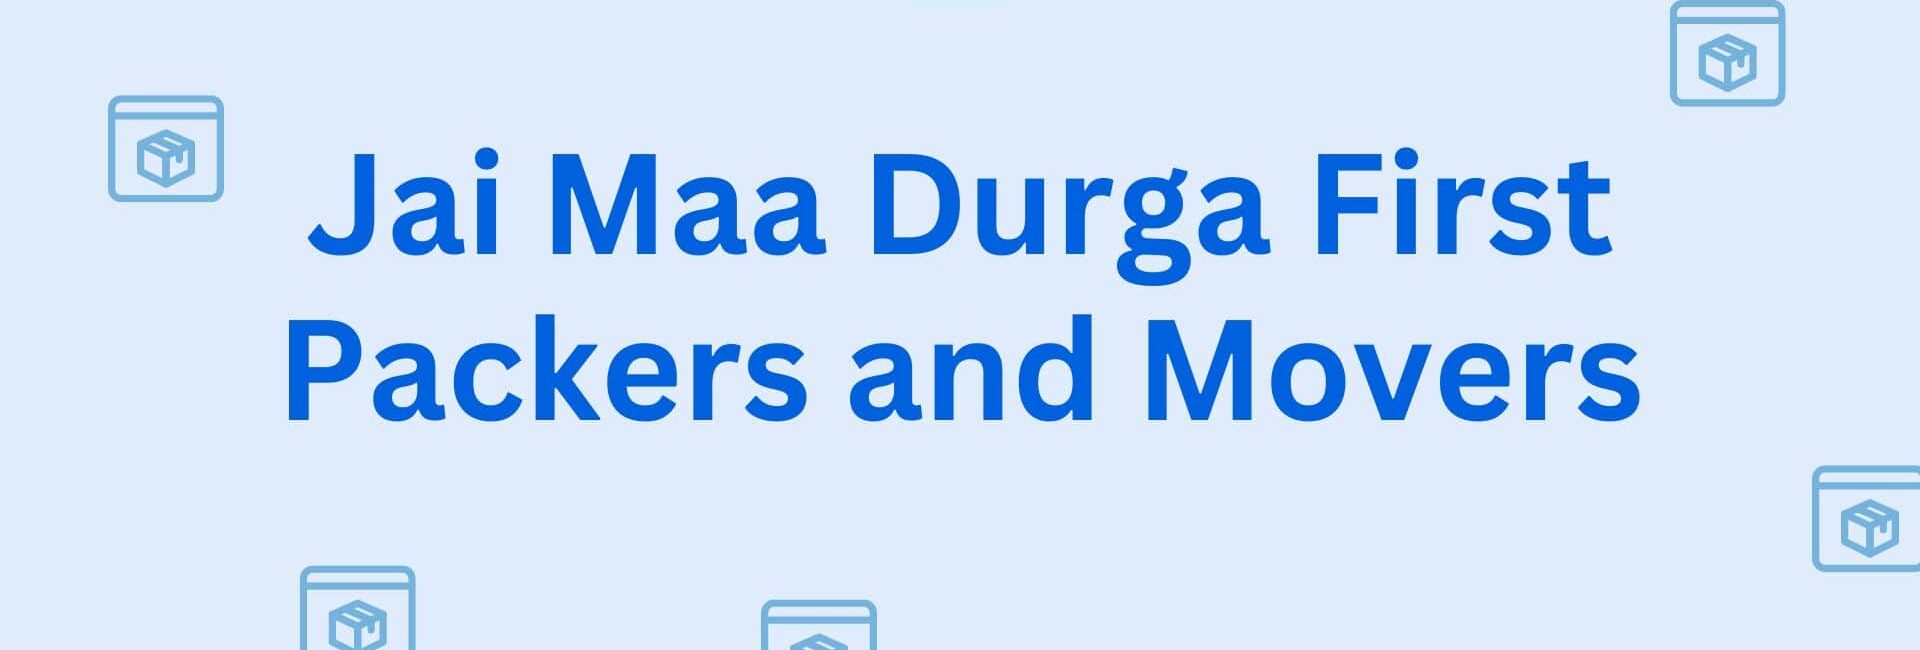 Jai Maa Durga First Packers and Movers - Mover and Packers in Hisar